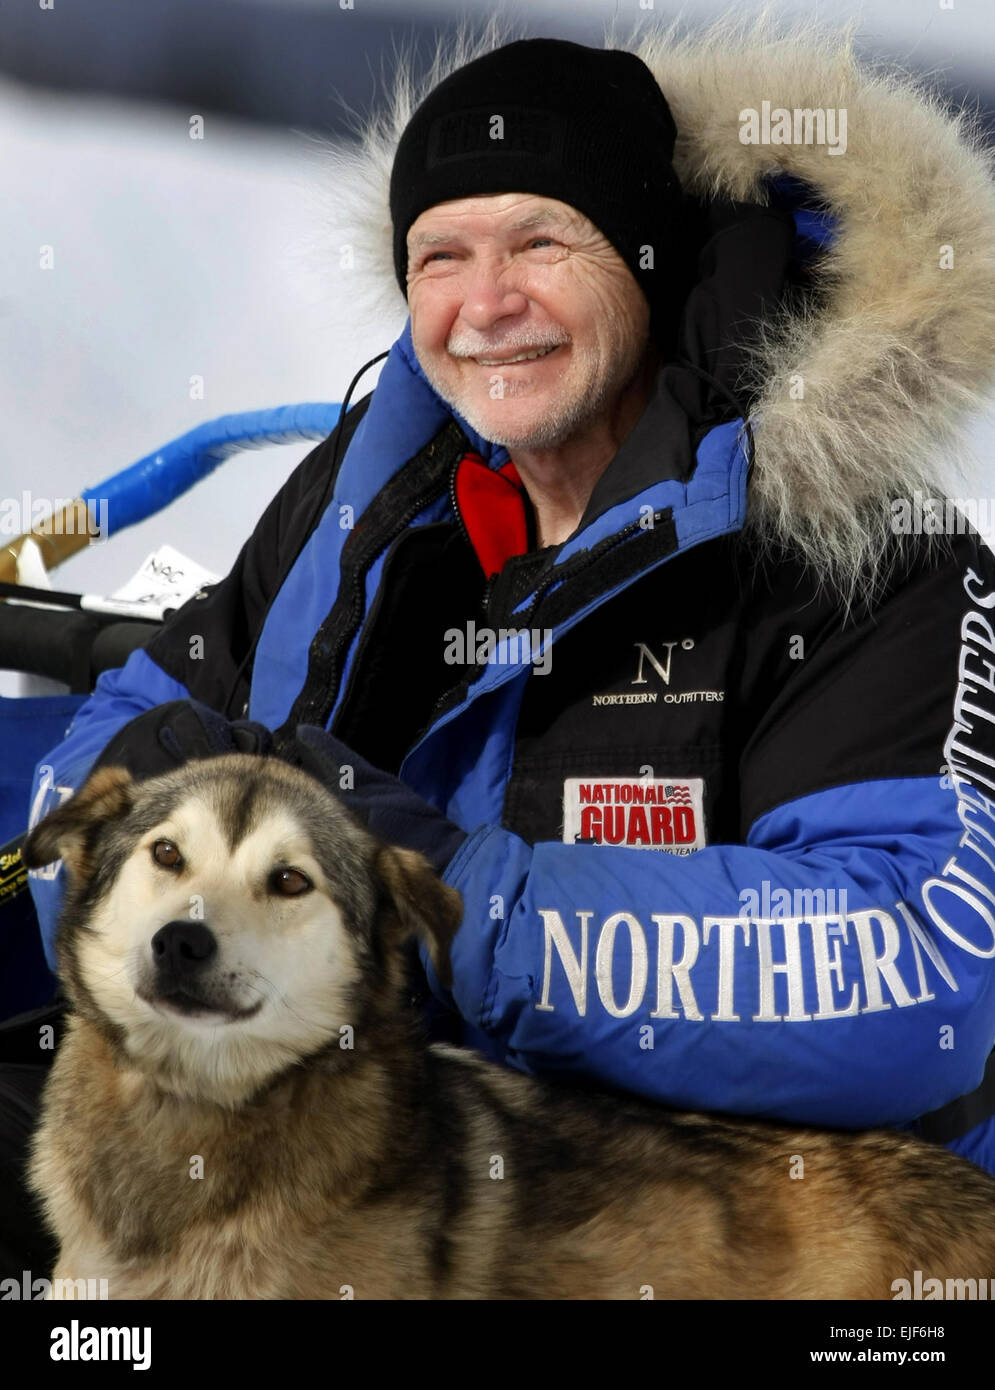 U.S. Army Master Sgt. Rodney Whaley, a Tennessee Army National Guardsman, poses for photos with one of his sled dogs in Alaska on March 10, 2008.  Whaley will be competing for the upcoming 2008 Iditarod dog sled race, billed as &quot;The World's Last Great Race&quot; in Anchorage, Alaska, which will take him over frozen rivers, jagged mountain ranges, dense forests, desolate tundra and miles of windswept coast.  Whaley will become the first Tennessean in history to compete in the race.   Russel Lee Klika, U.S. Army. Stock Photo